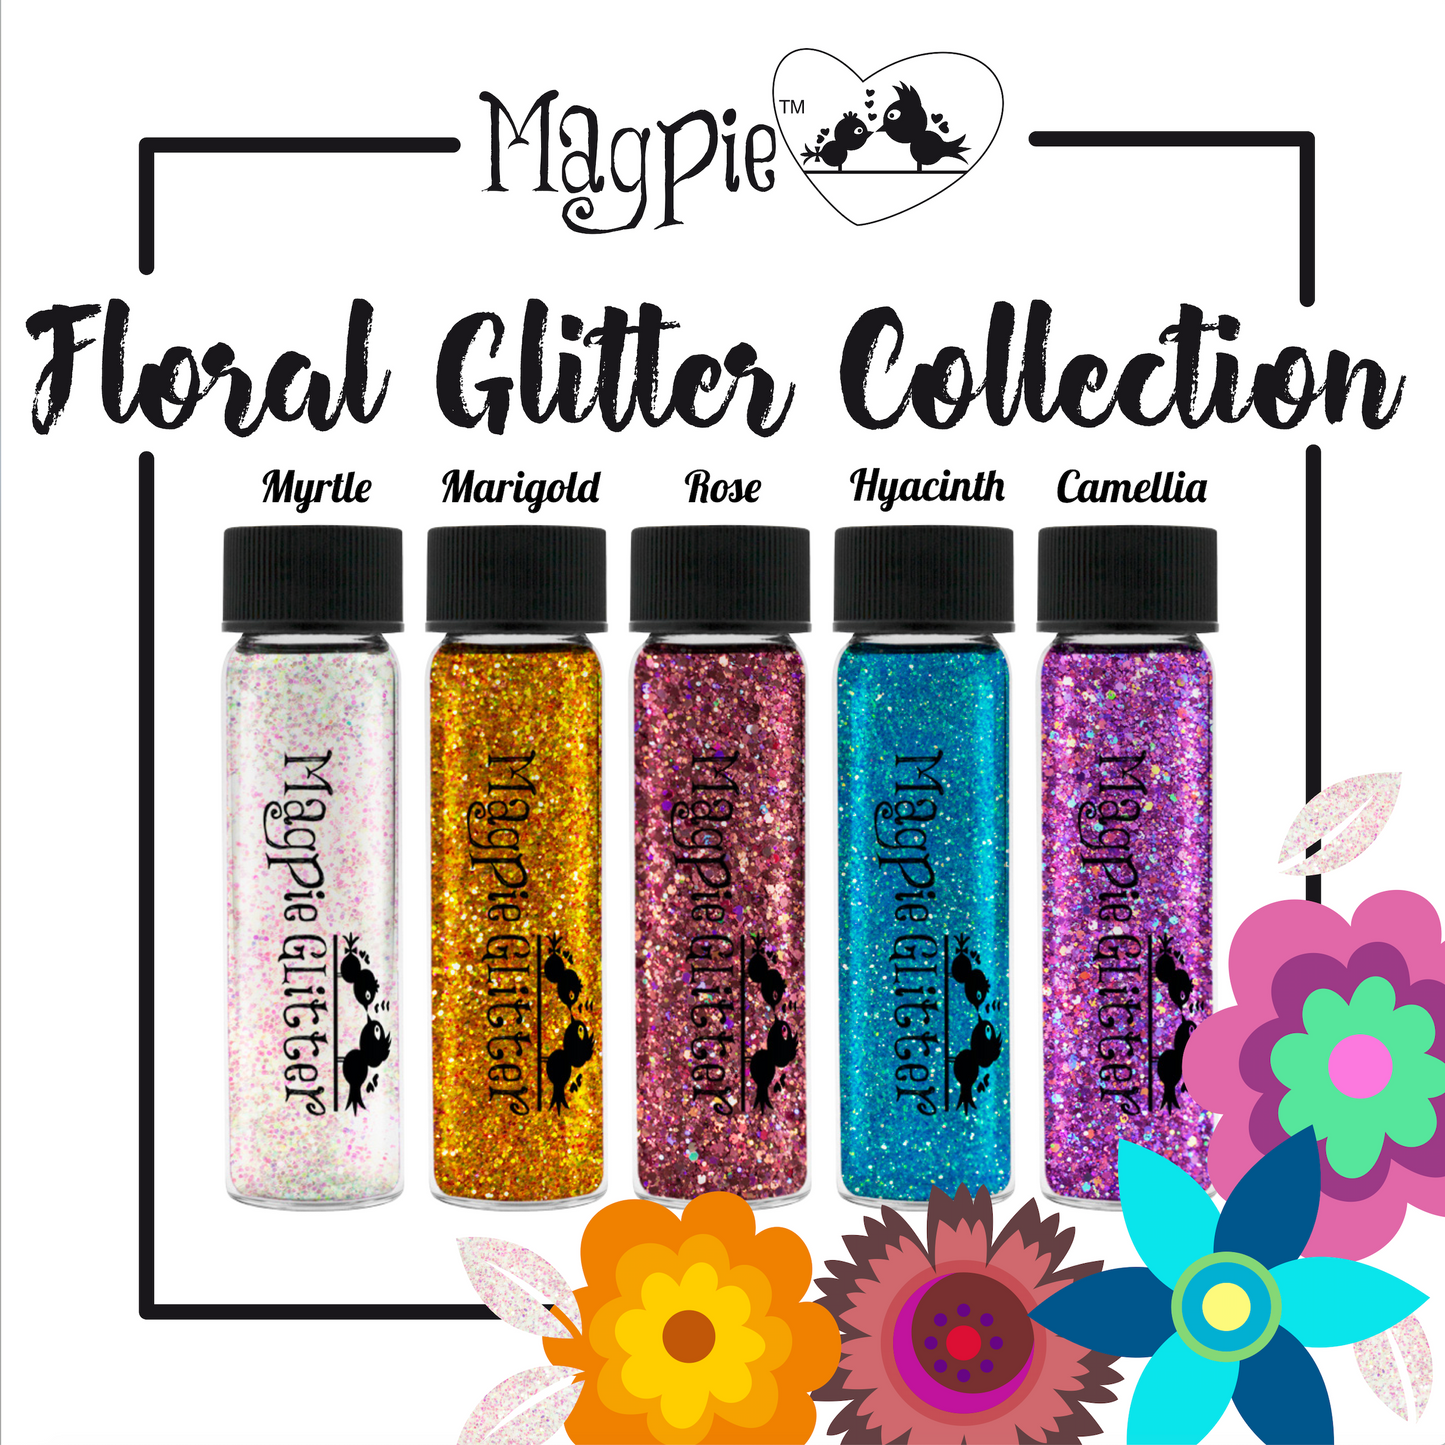 Floral Glitter collection 2019